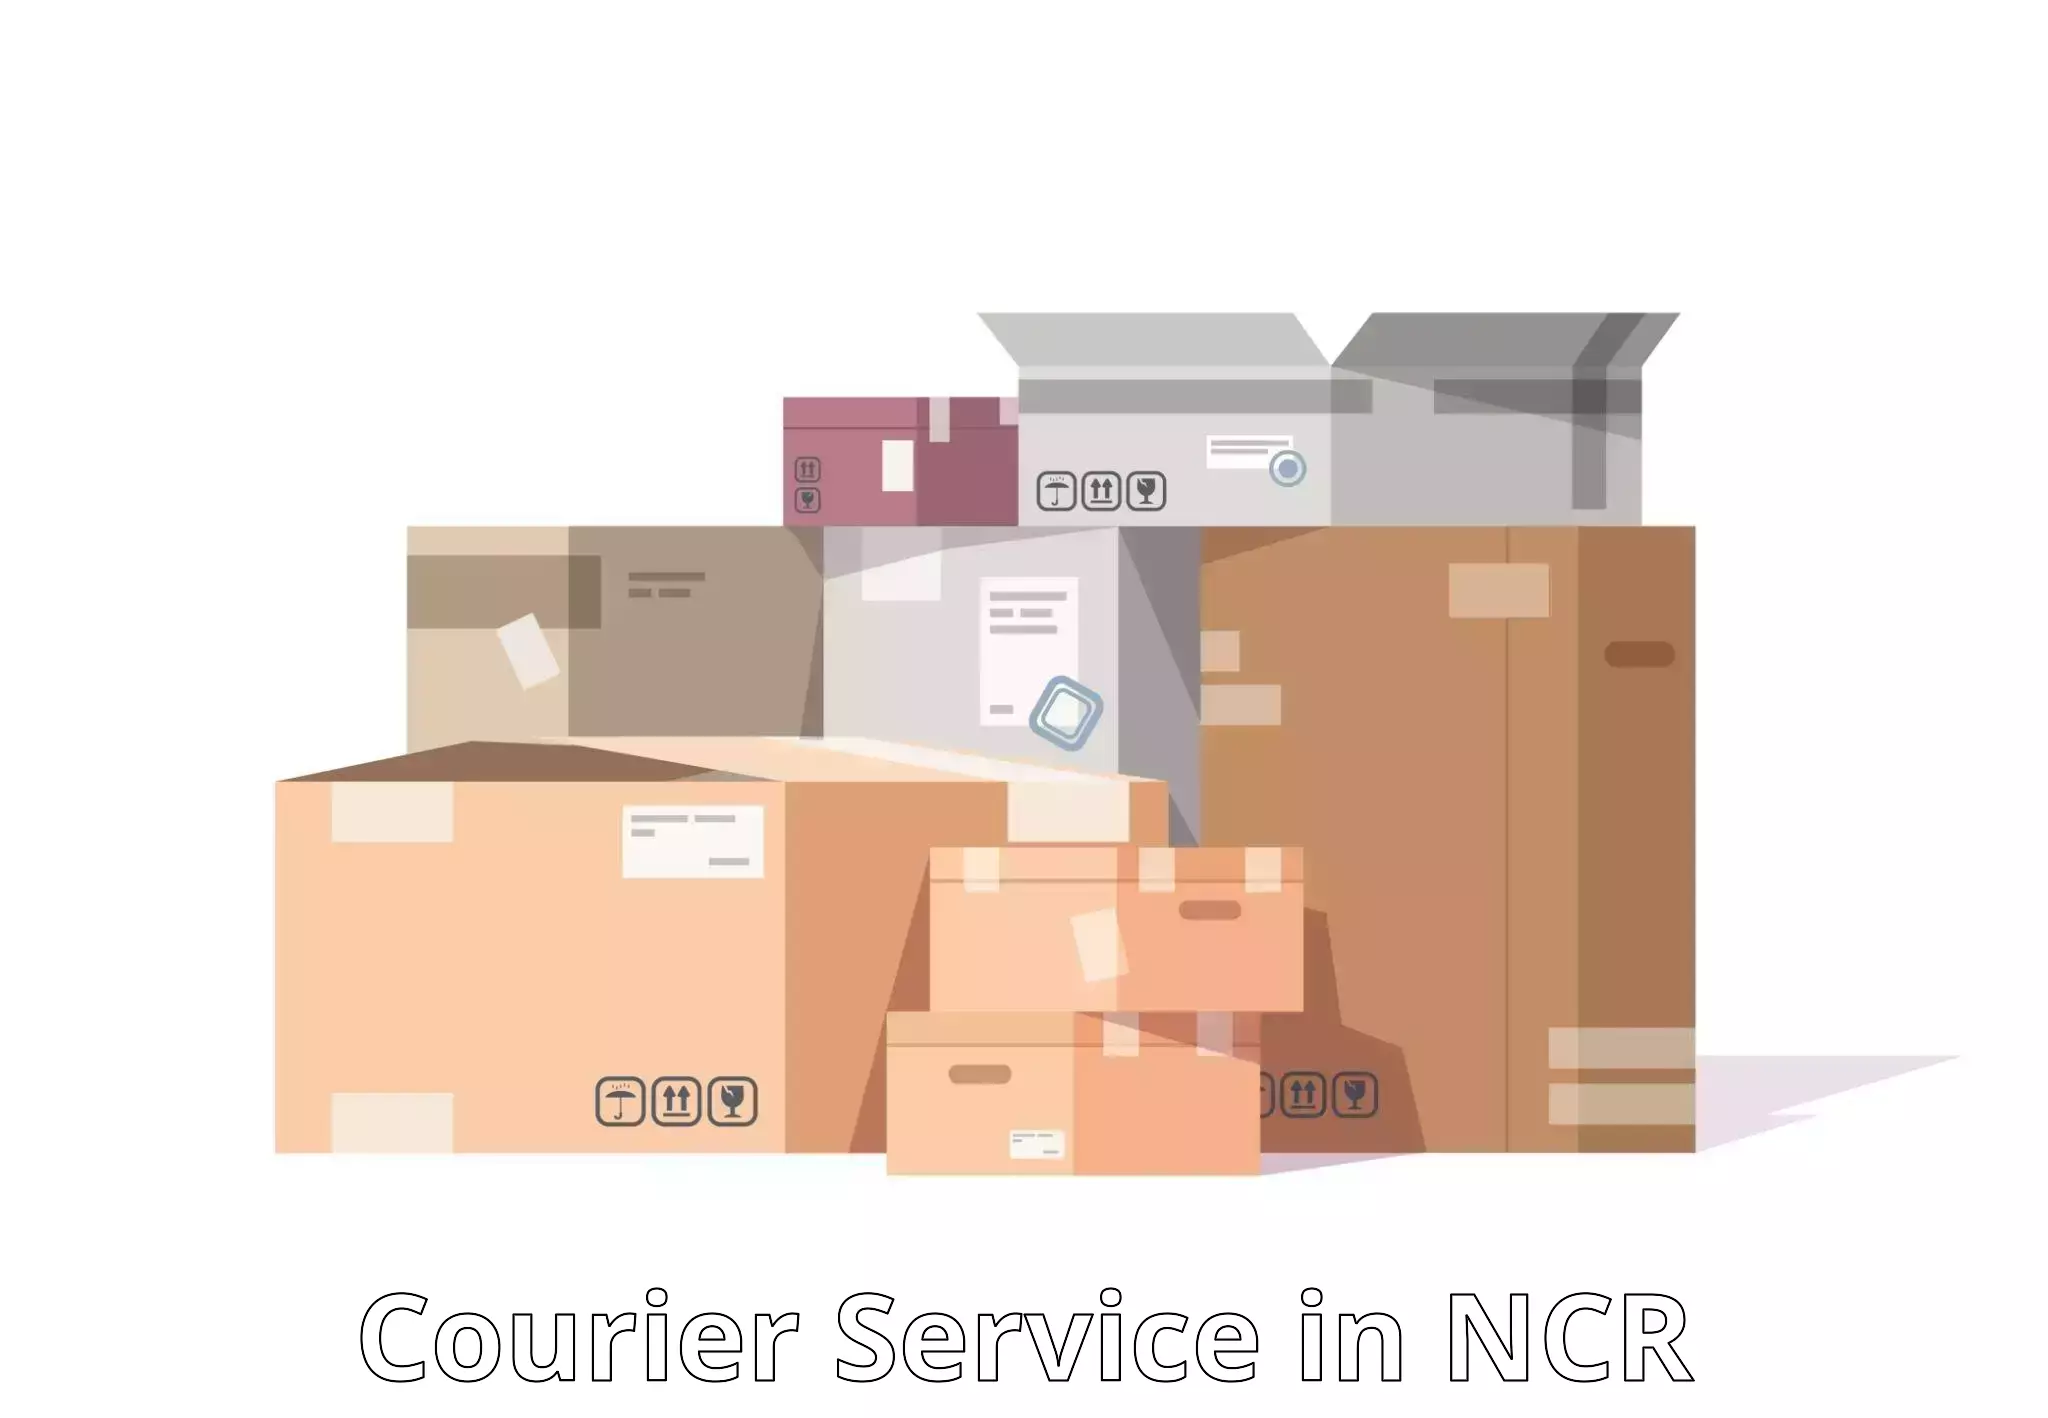 Express mail solutions in NCR